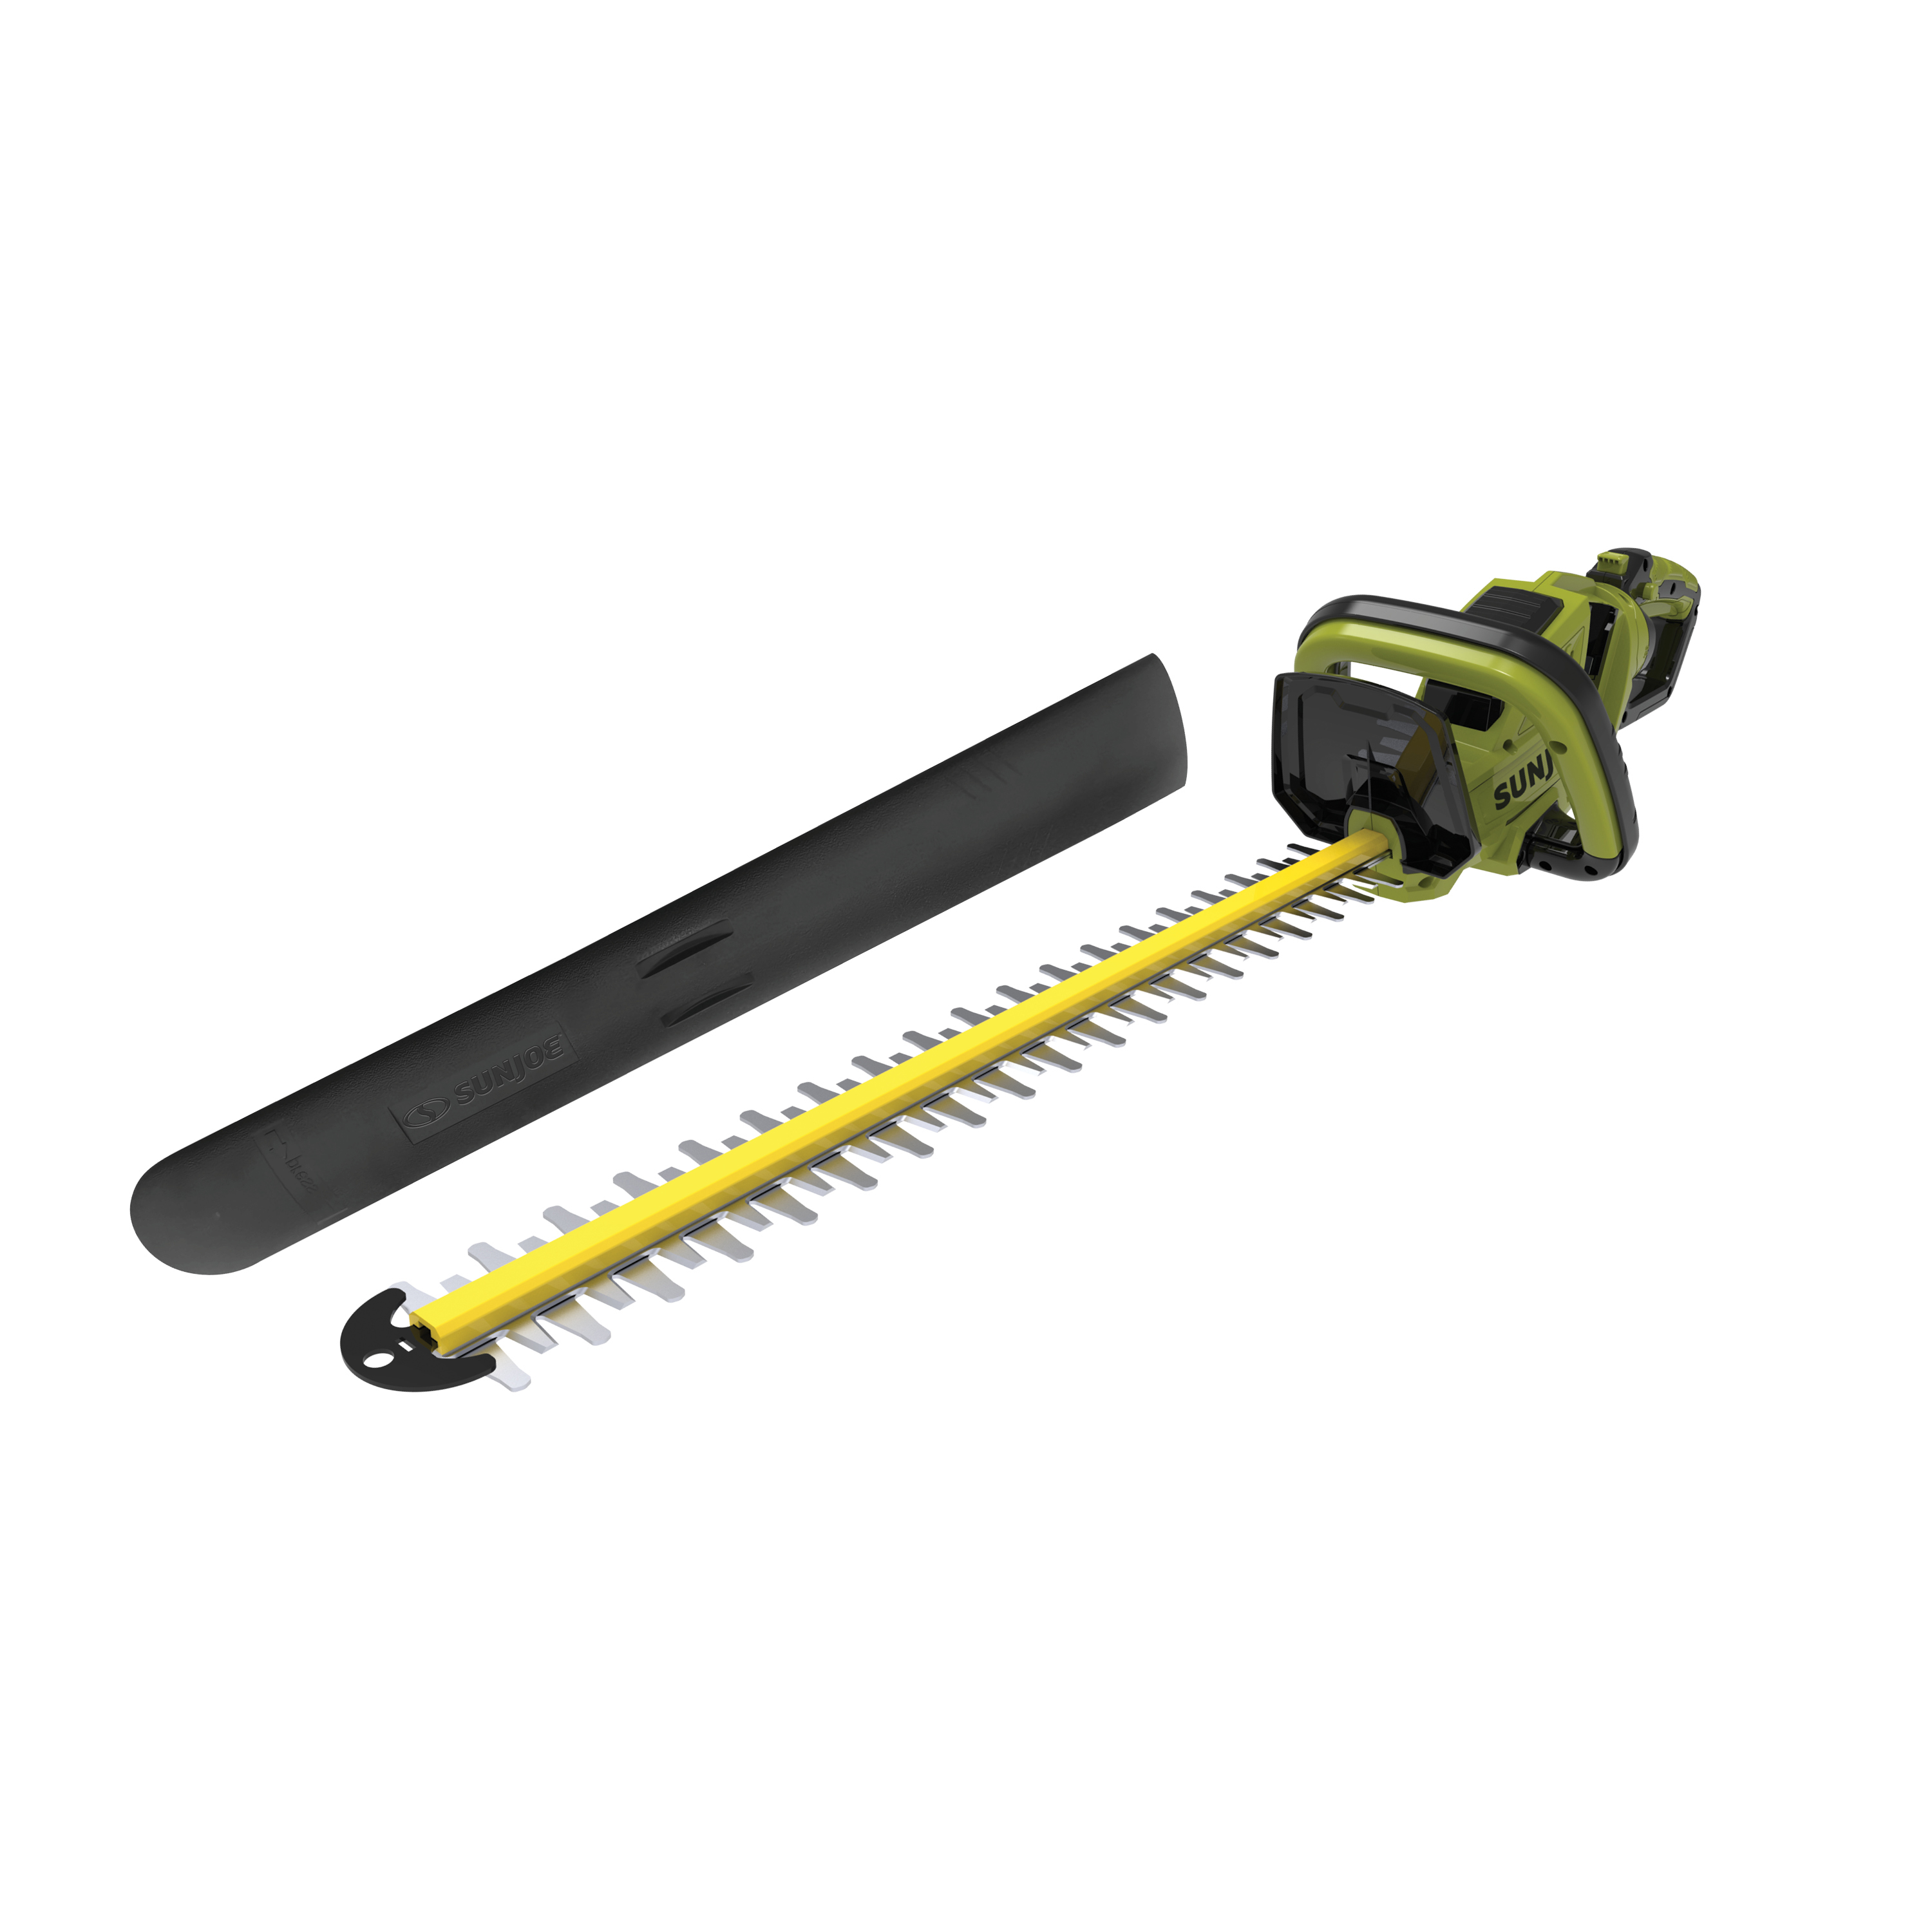 Sun Joe 48-Volt IONMAX Cordless Hedge Trimmer | Tool Only